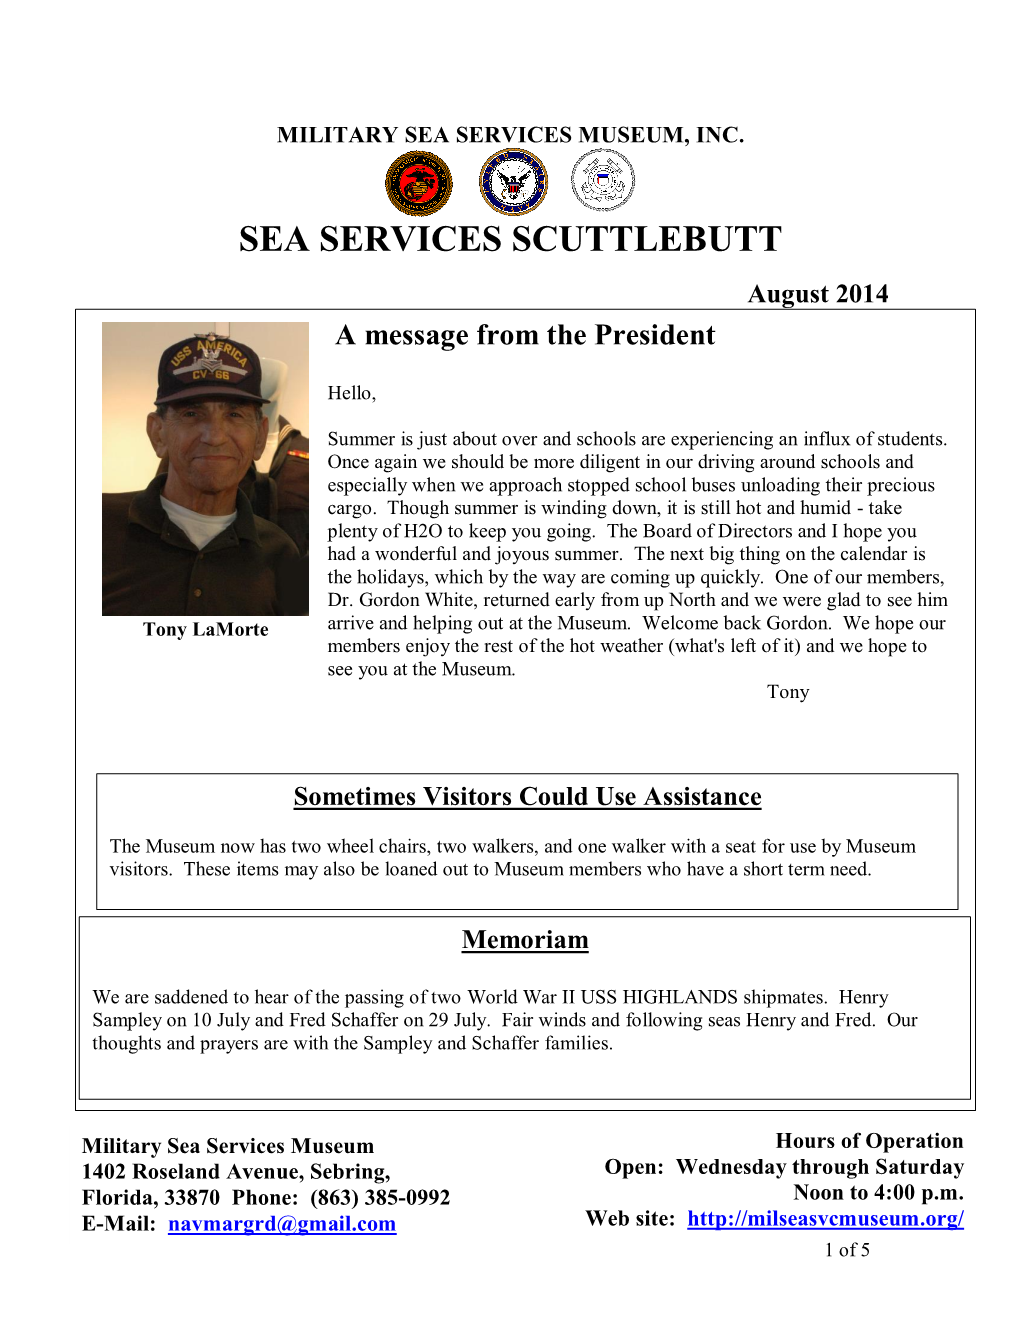 SEA SERVICES SCUTTLEBUTT August 2014 a Message from the President